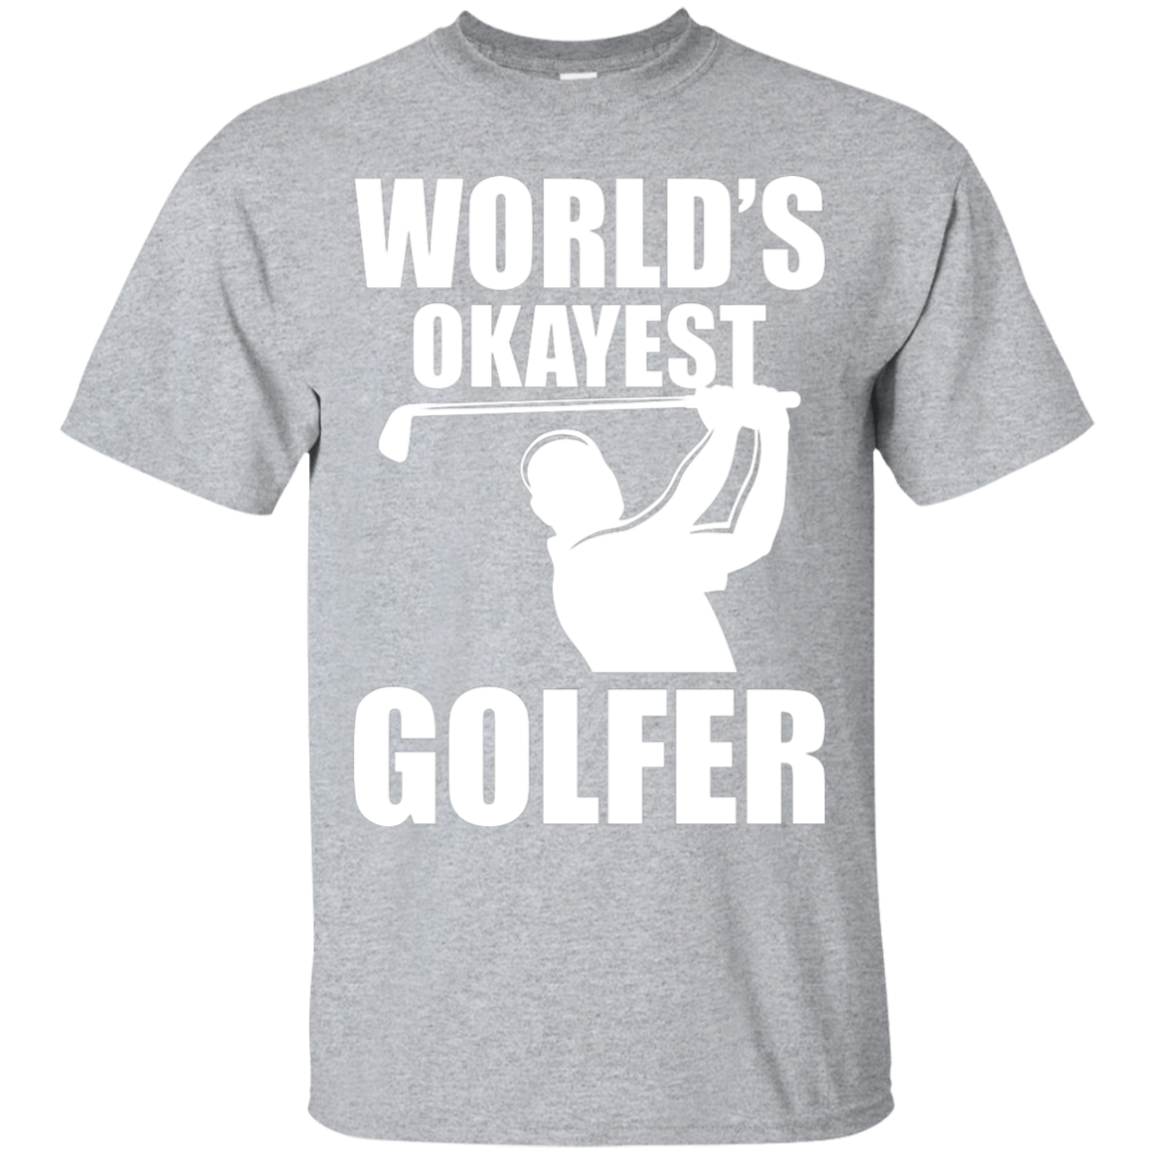 World's Okayest Golfer T-Shirt Apparel - The Beer Lodge